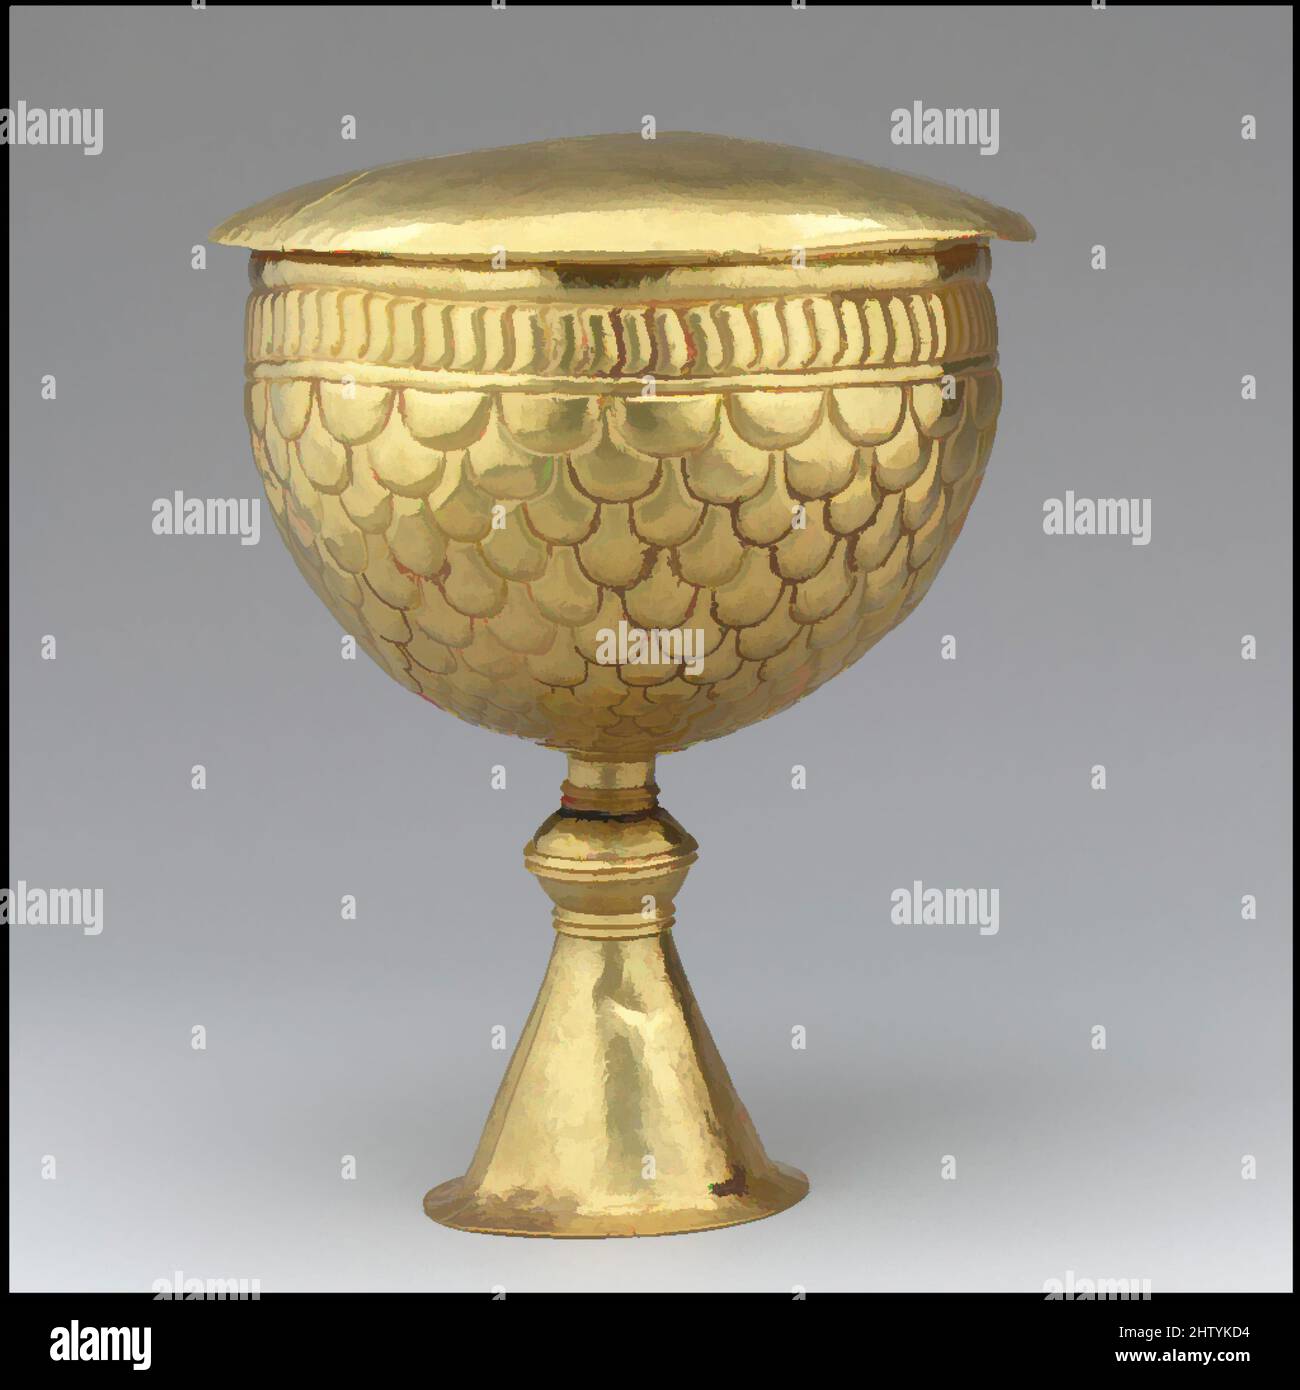 Art inspired by Gold Goblet and Cover (?), 700s, Avar or Byzantine, Gold, a only: 6 5/8 × 4 3/4 in., 13 Troy Ounces (16.8 × 12.1 cm, 418g), Metalwork-Gold, This goblet may in fact be a Byzantine export, though the foot of the cup does not conform to the standard shape of Byzantine, Classic works modernized by Artotop with a splash of modernity. Shapes, color and value, eye-catching visual impact on art. Emotions through freedom of artworks in a contemporary way. A timeless message pursuing a wildly creative new direction. Artists turning to the digital medium and creating the Artotop NFT Stock Photo